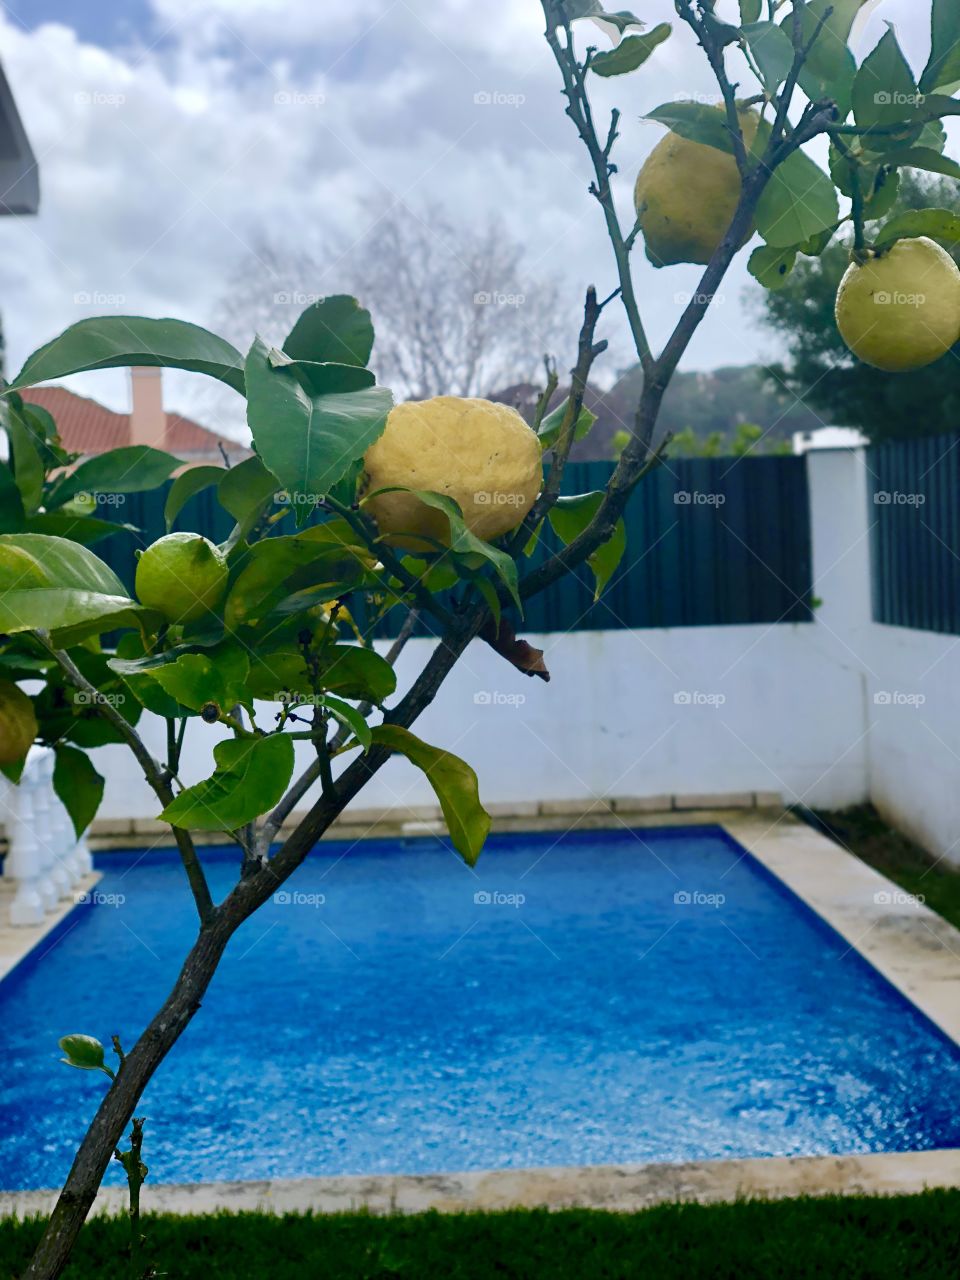 Lemons and pool. What a treat!